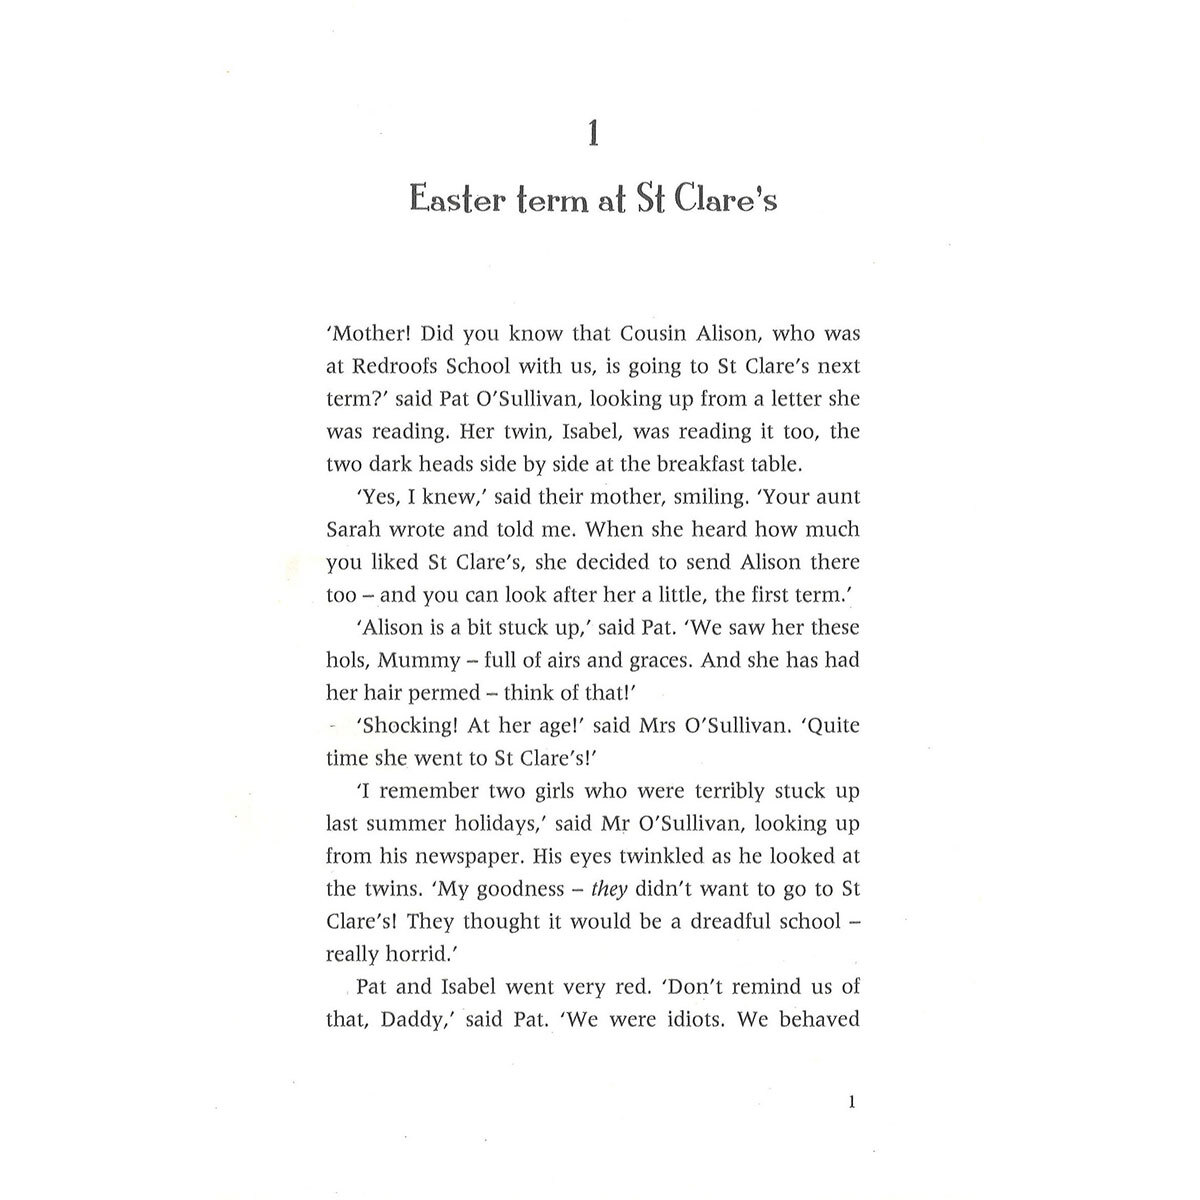 Image of page spread